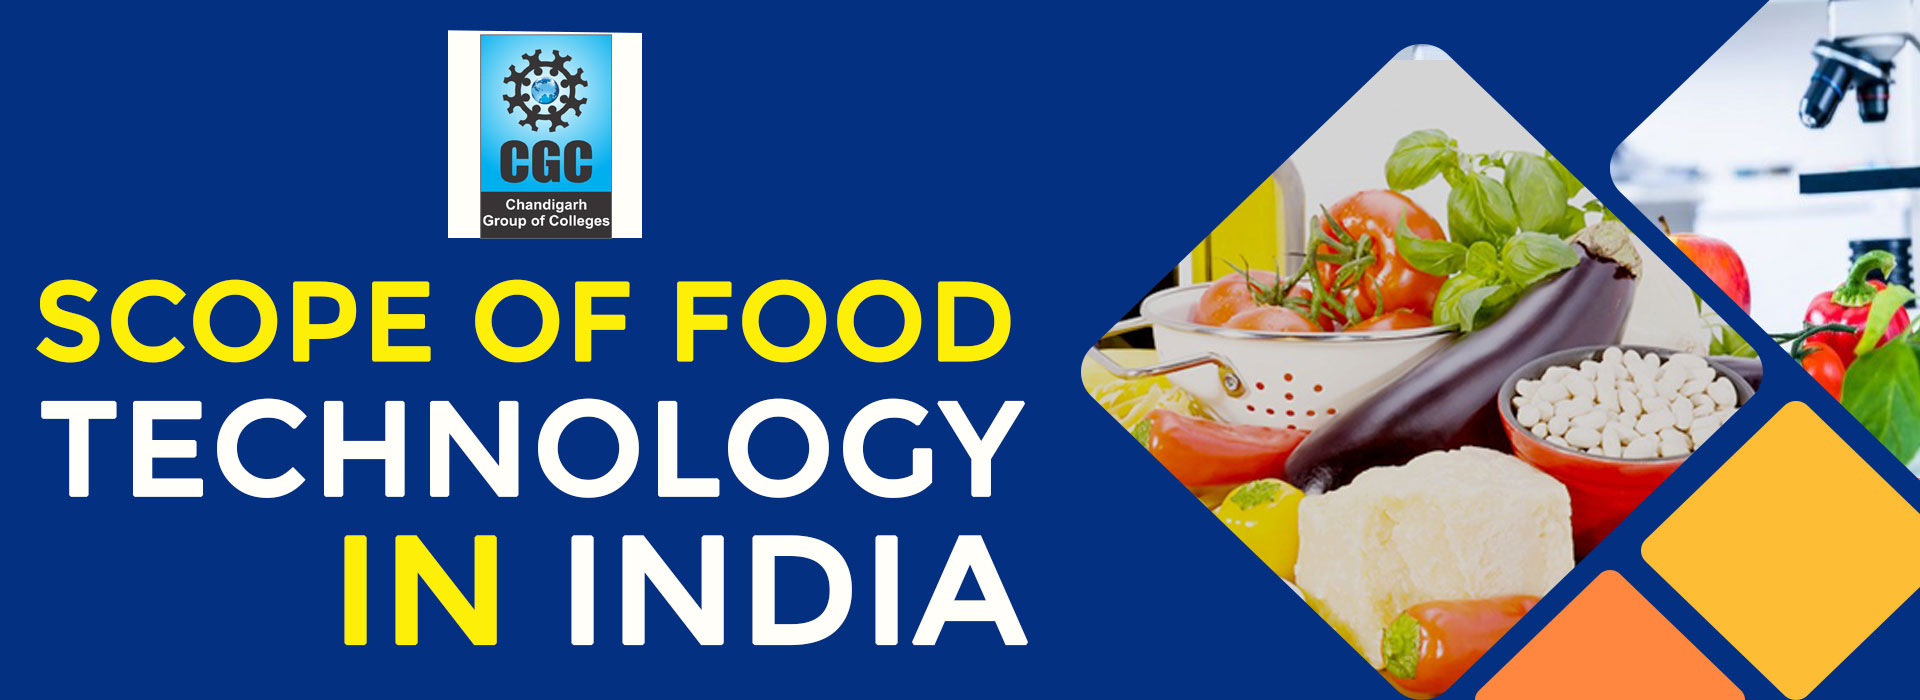 Scope of food technology in India 